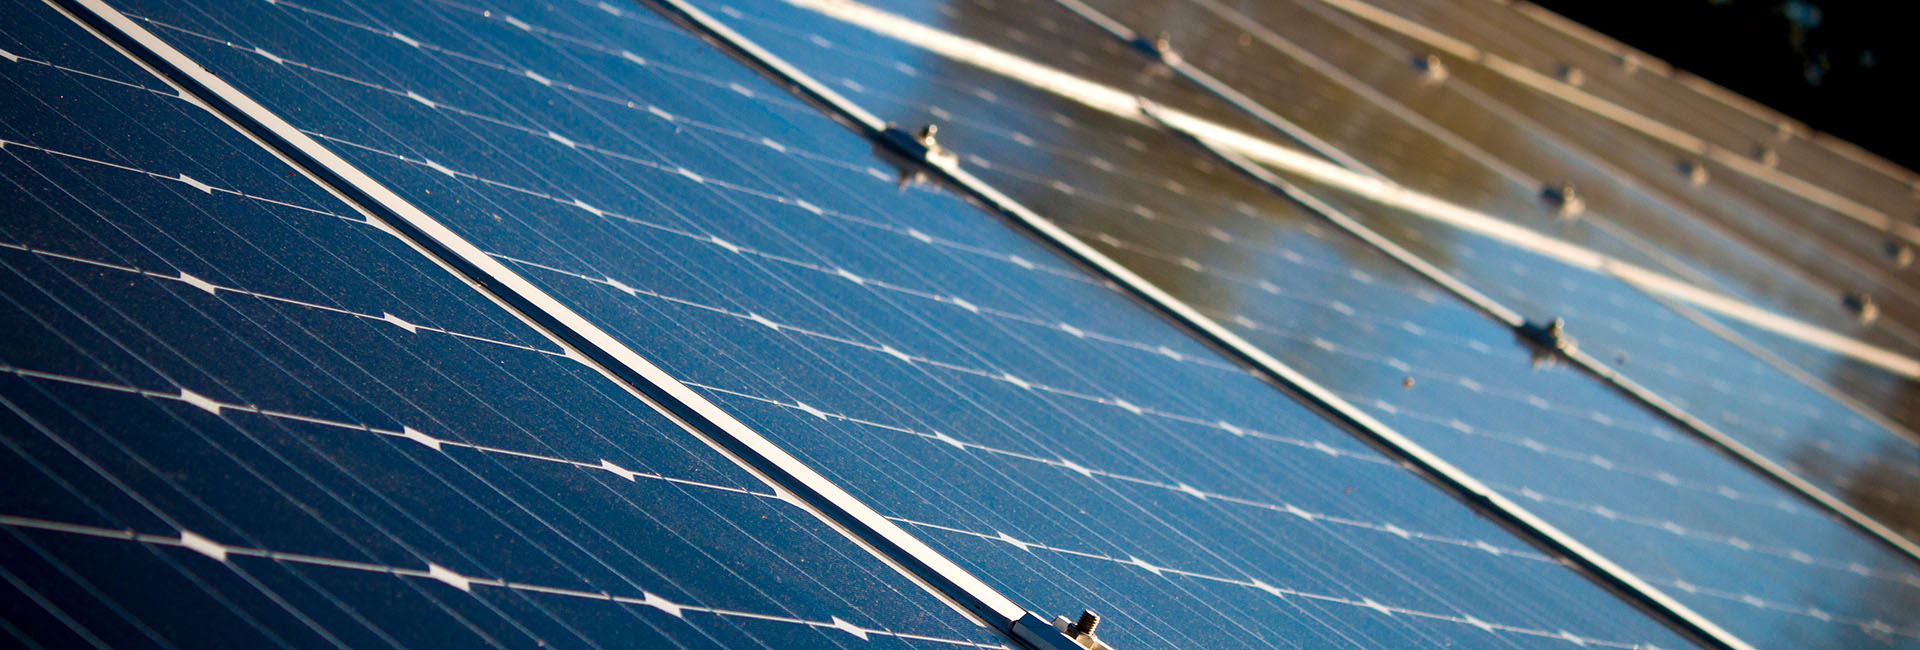 New RPS will Help Solar Bloom in the Garden State